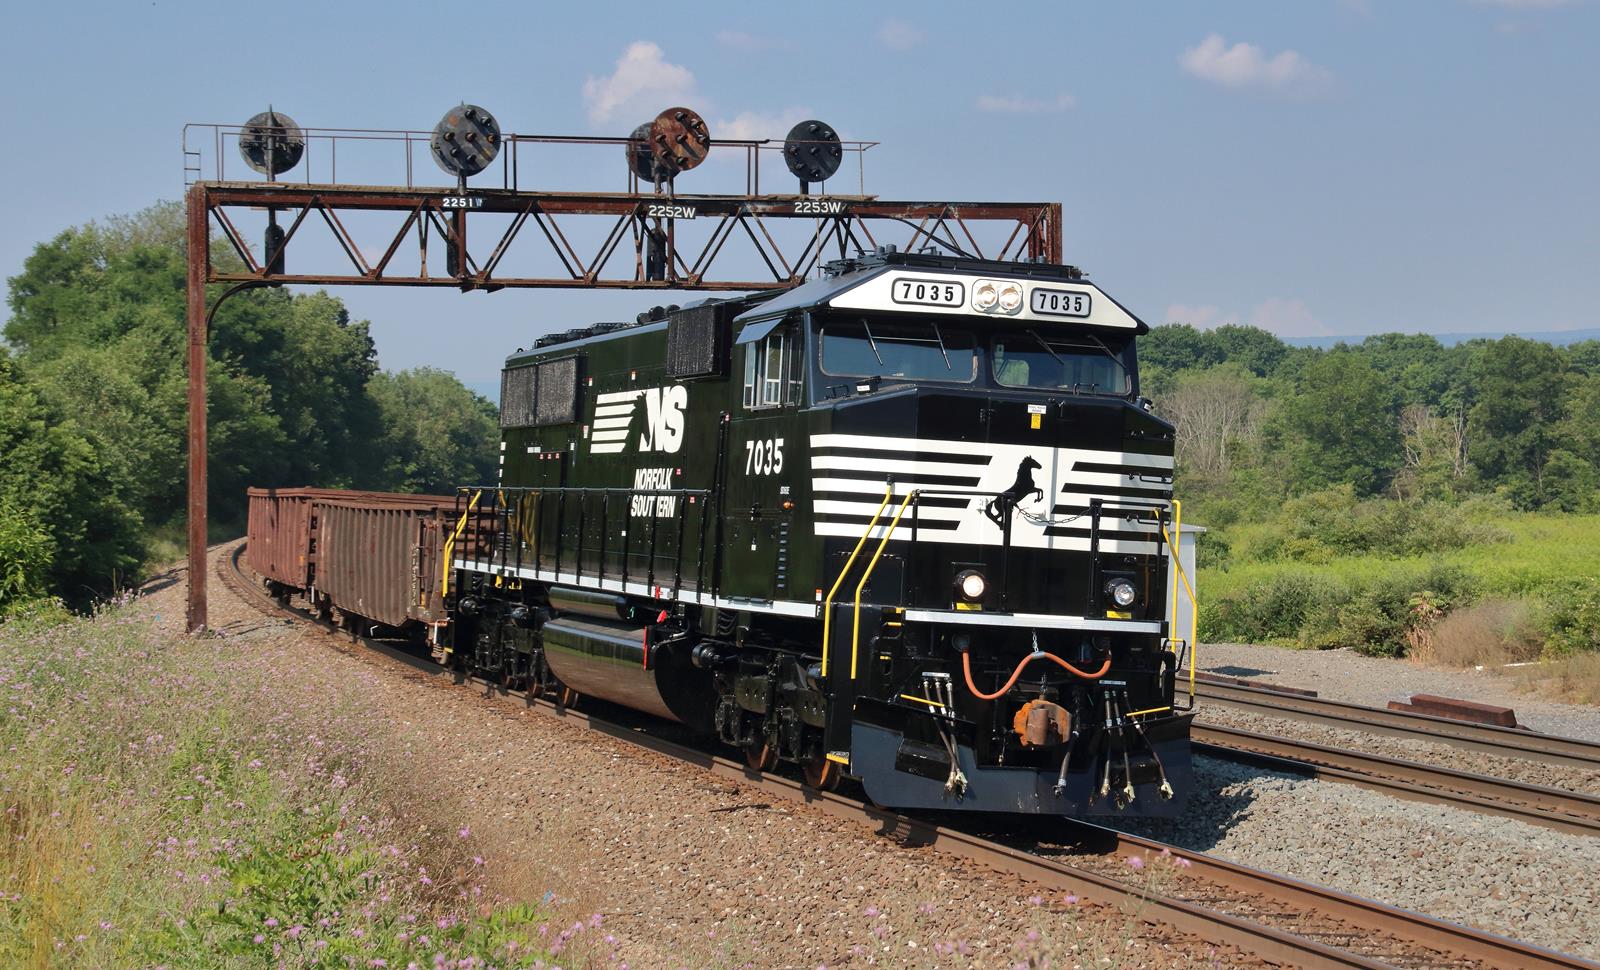 NS 7035 is a class EMD SD60E and  is pictured in Tipton, Pennsylvania, USA.  This was taken along the NS Pittsburgh Line on the Norfolk Southern. Photo Copyright: Marc Lingenfelter uploaded to Railroad Gallery on 01/08/2023. This photograph of NS 7035 was taken on Wednesday, July 19, 2017. All Rights Reserved. 